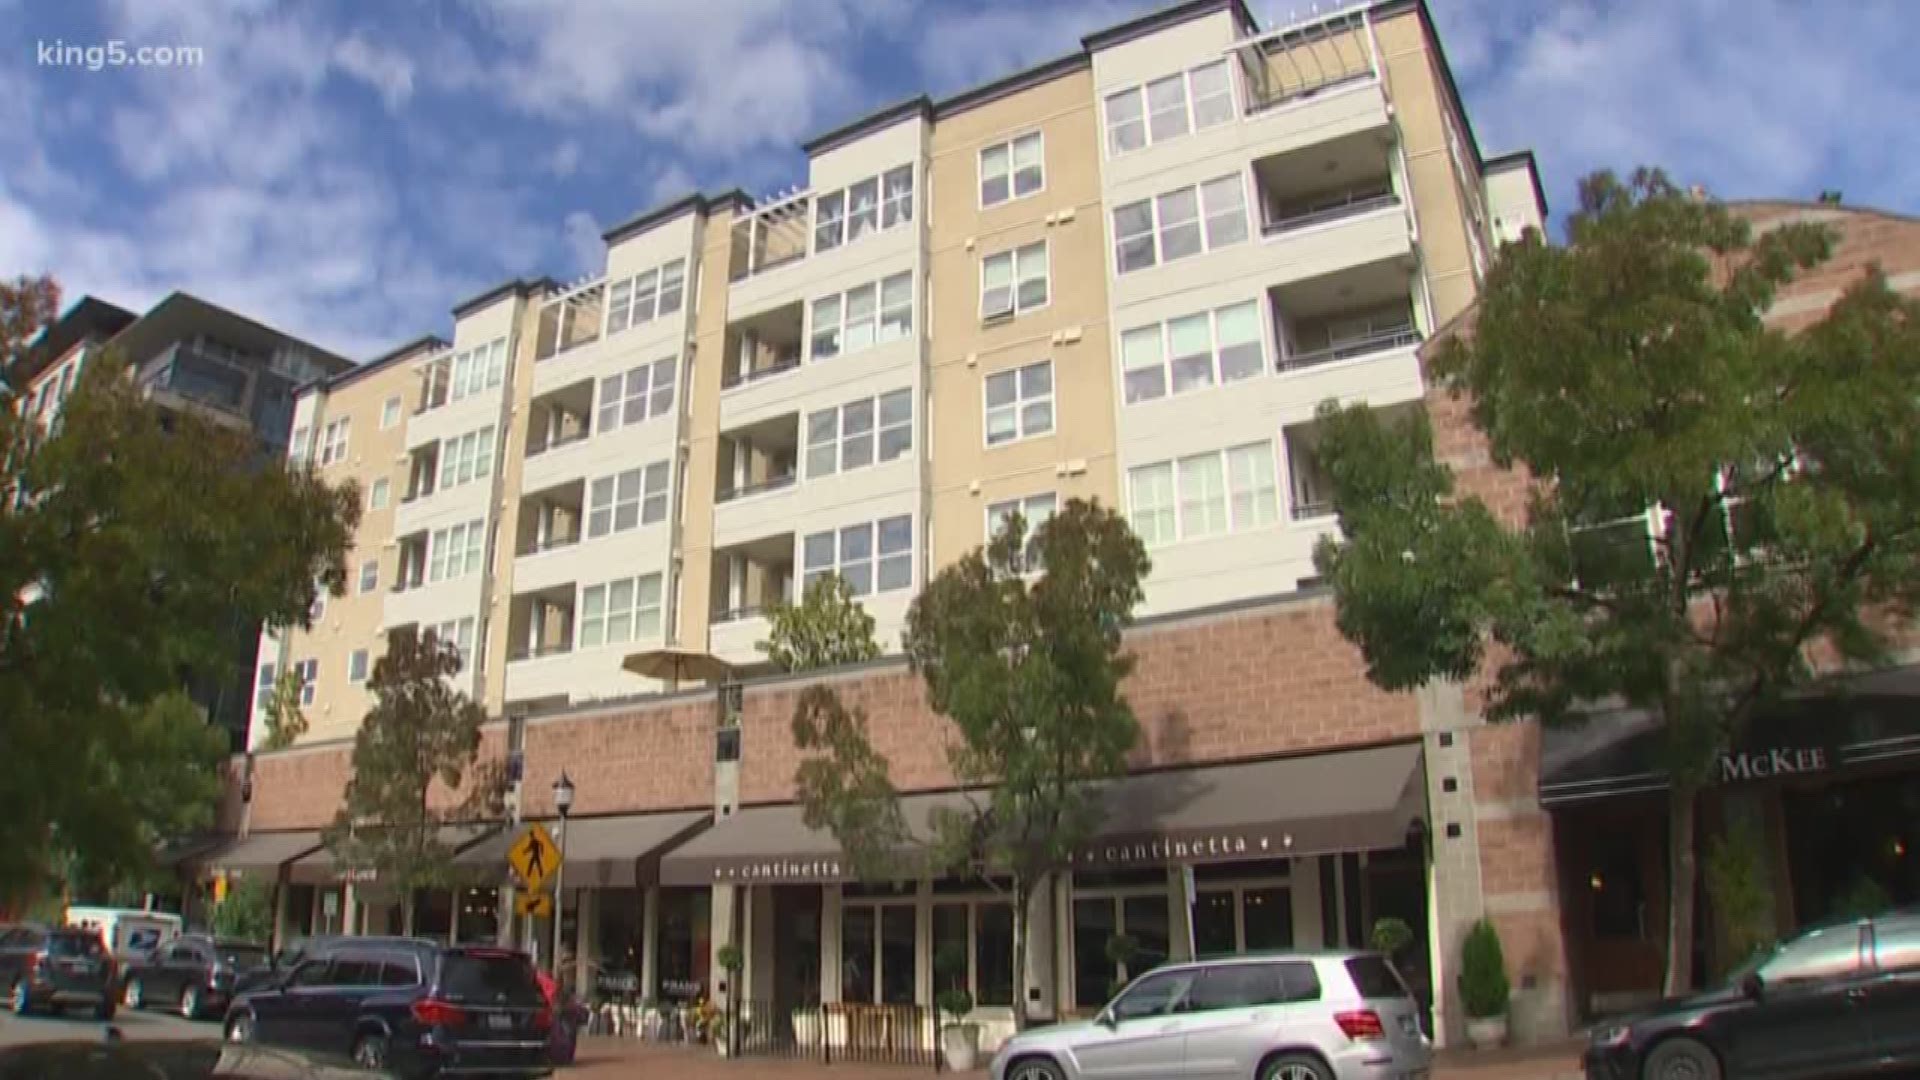 The former owner of a Bellevue condo purchased it through a taxpayer-funded affordable housing program and then moved to California, violating the provisions of an agreement while she rented it out.